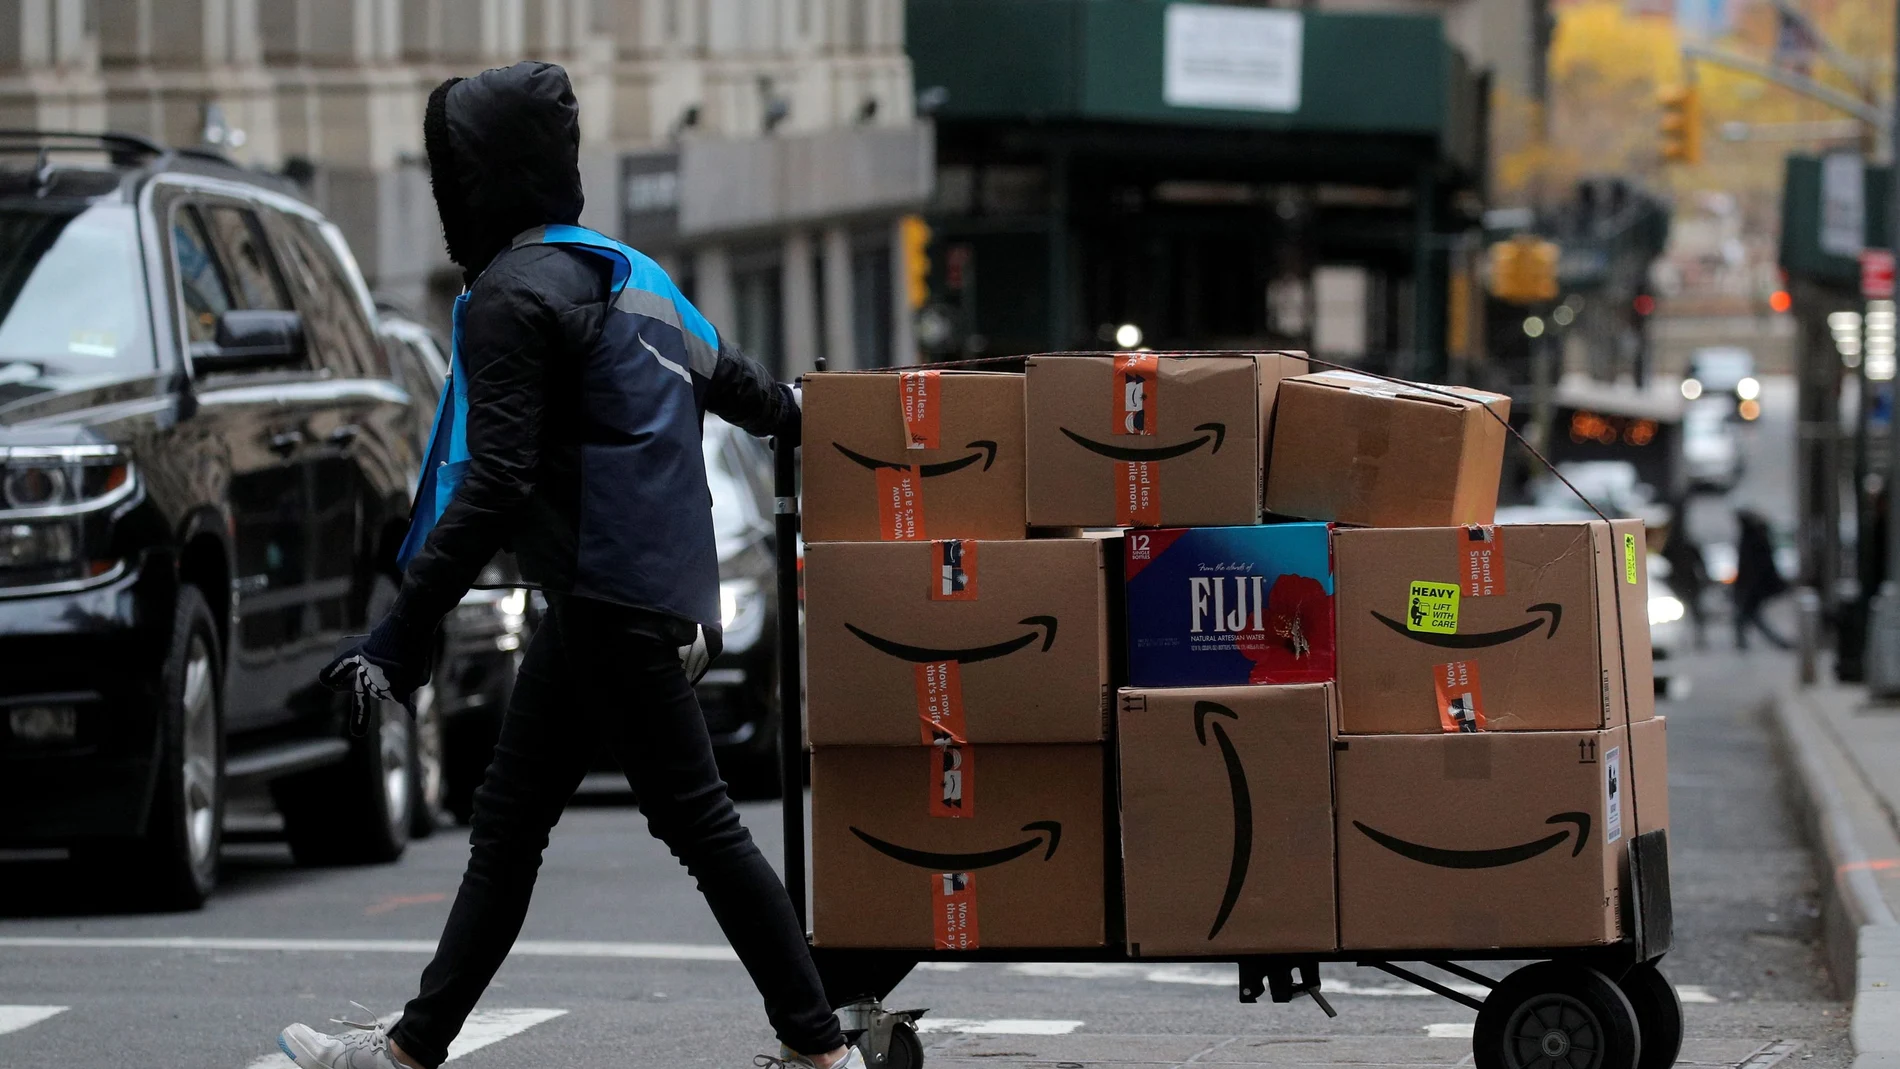 An Amazon delivery worker pulls a cart full of boxes for delivery on Cyber-Monday in New York City, U.S., November 29, 2021. REUTERS/Brendan McDermid REFILE - CORRECTING DATE